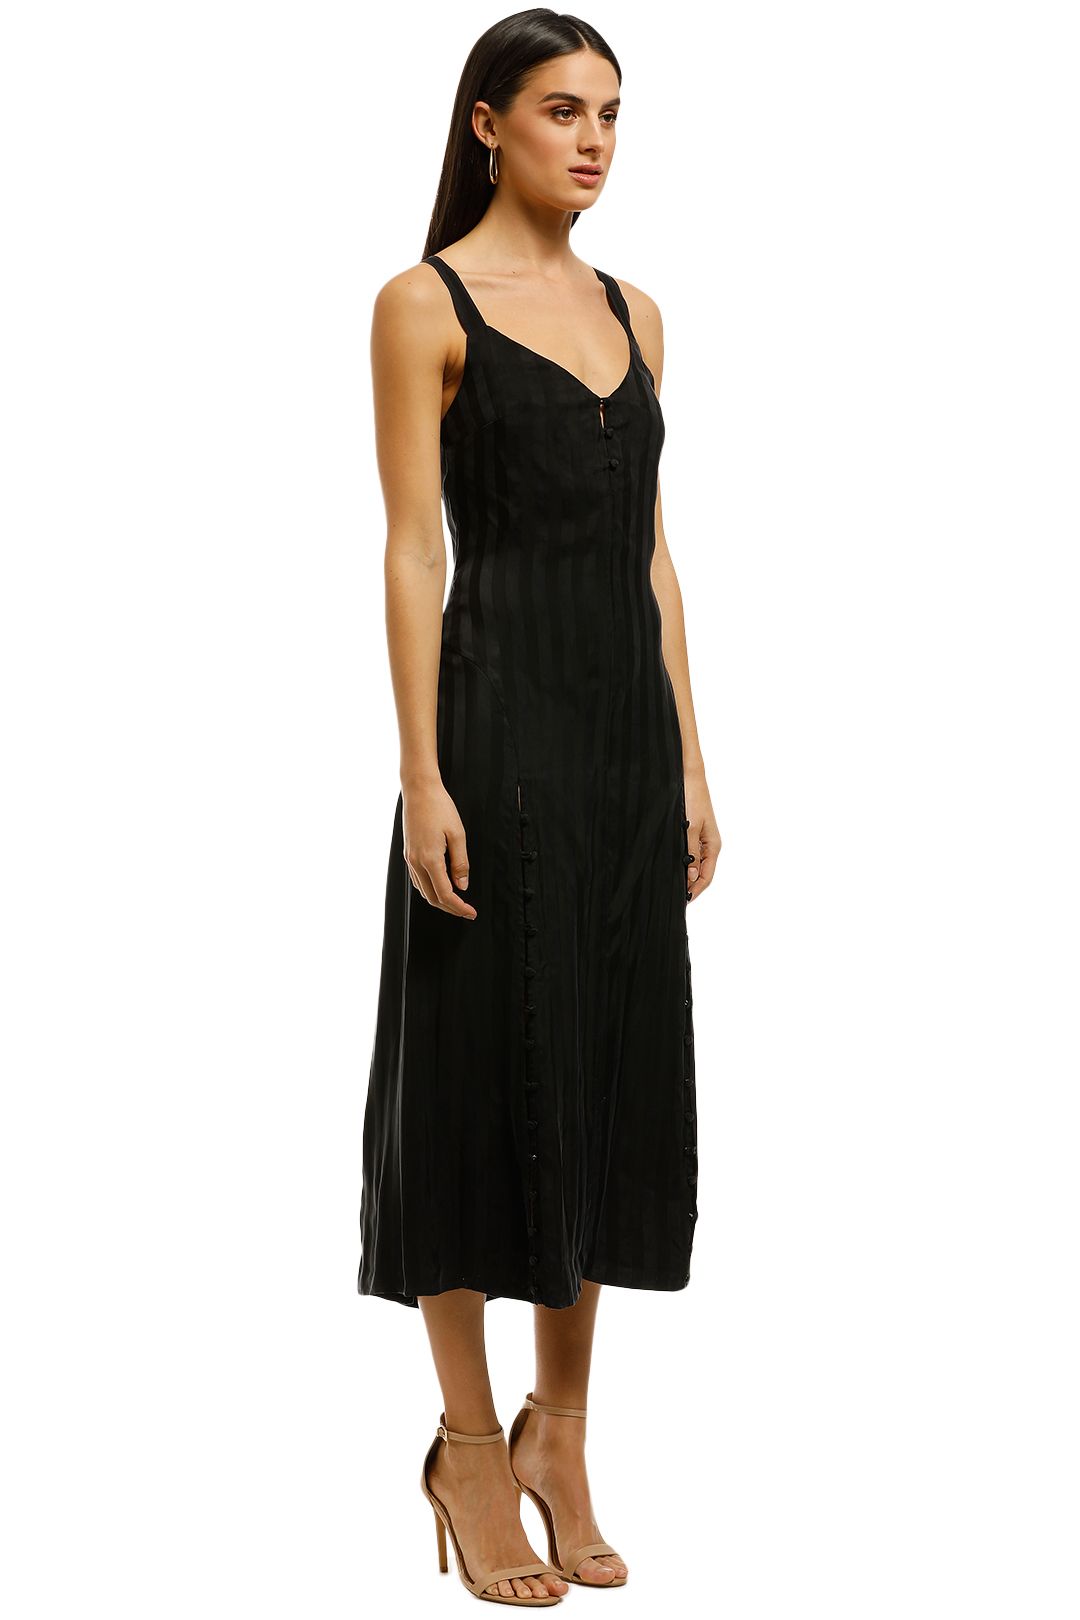 Third-Form-Looped-In-Slip-Dress-Side